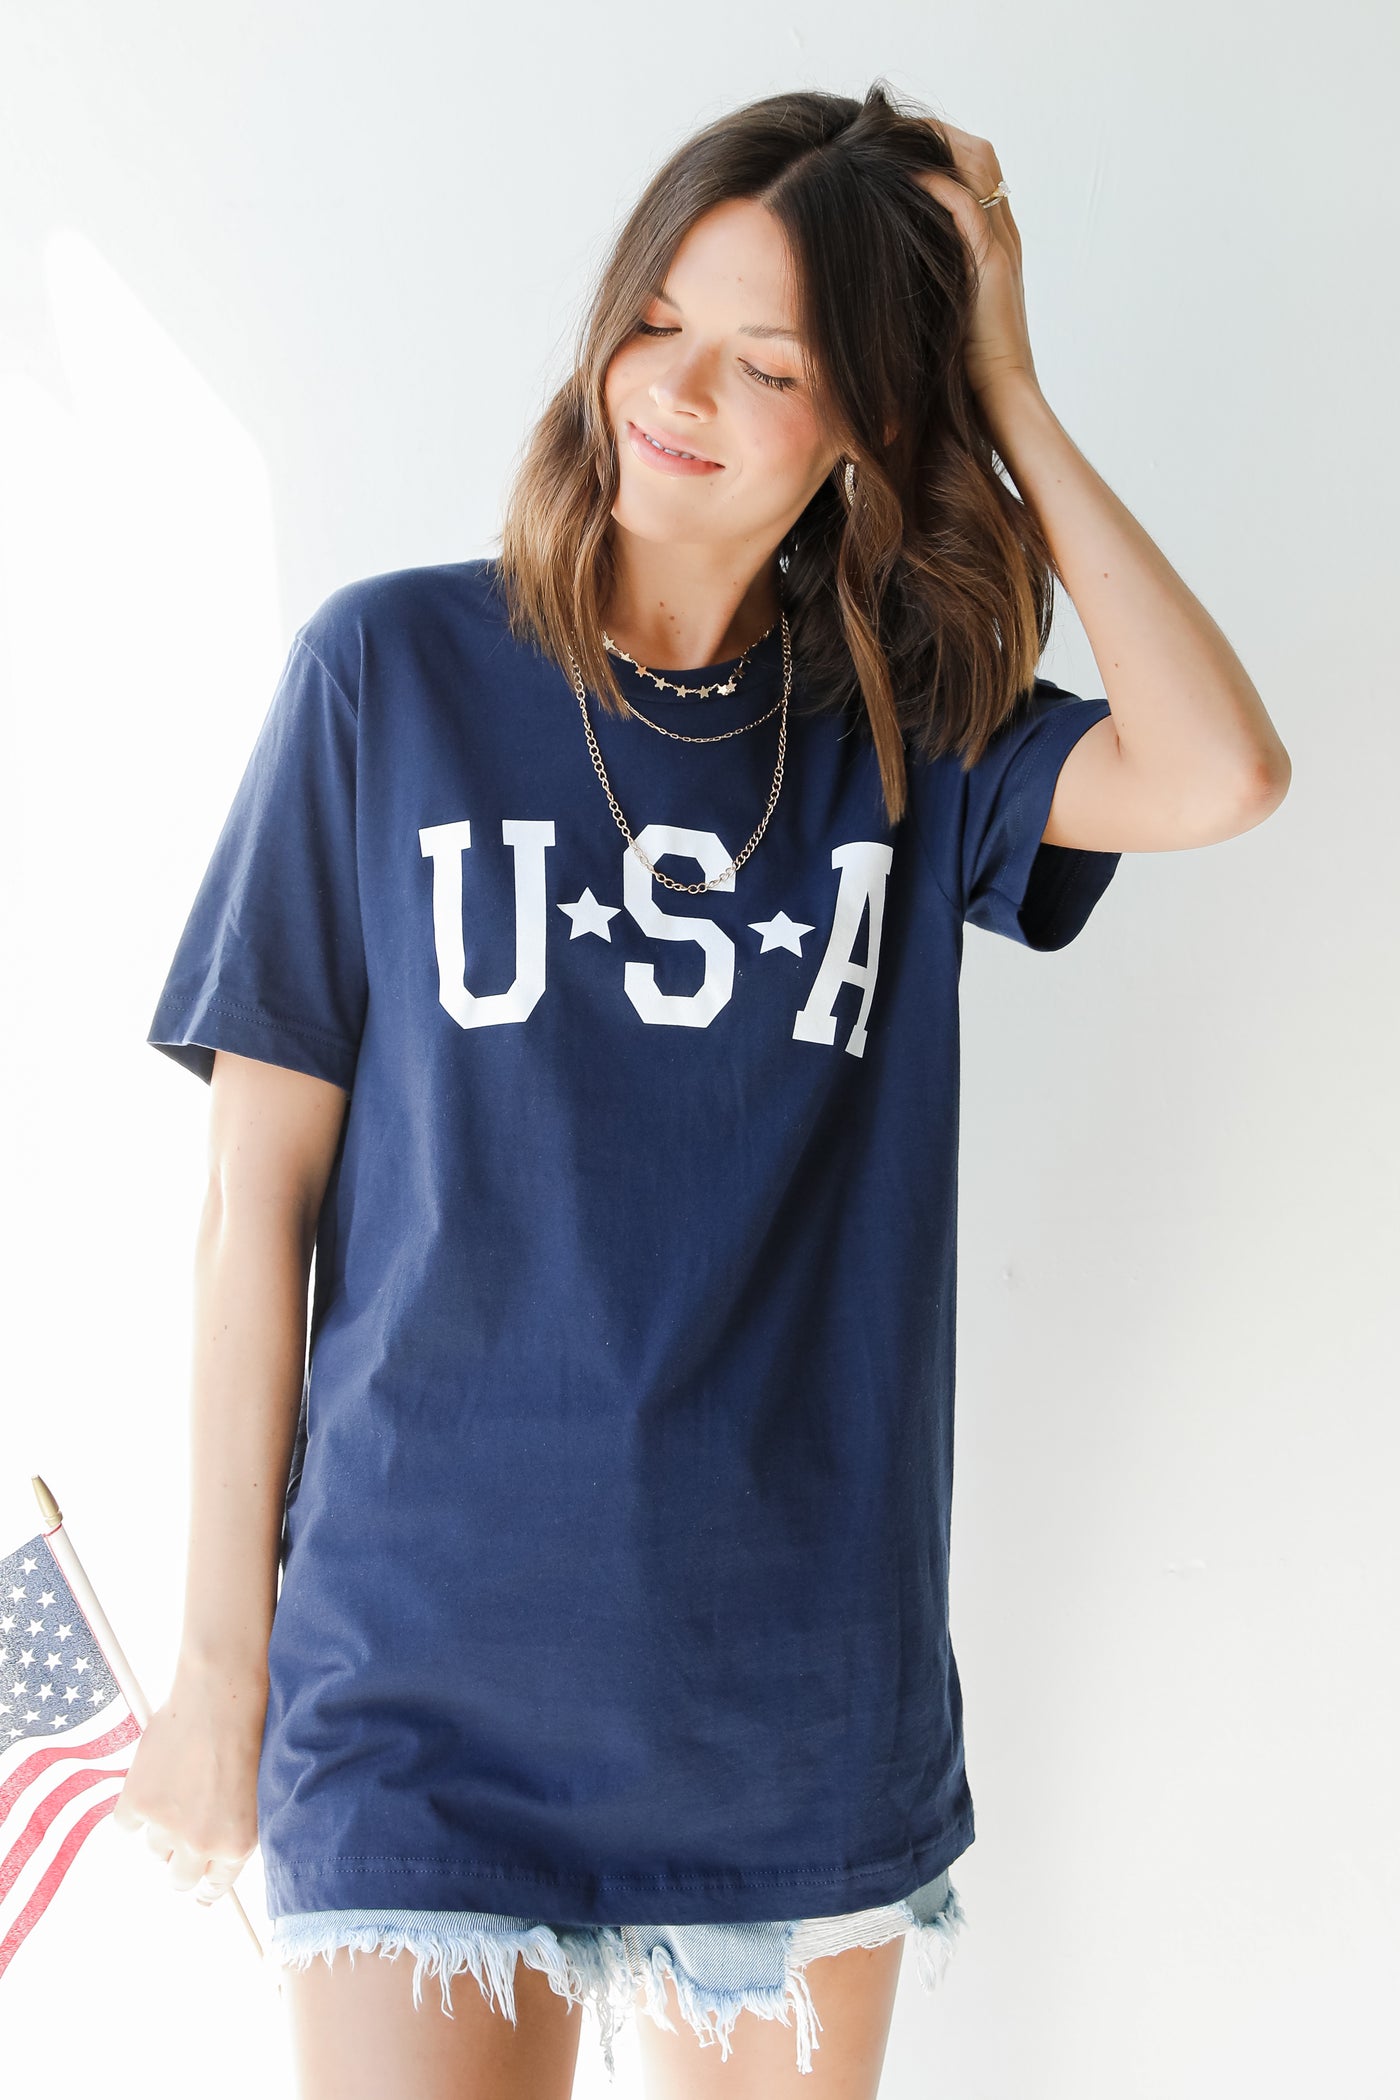 USA Star Graphic Tee front view